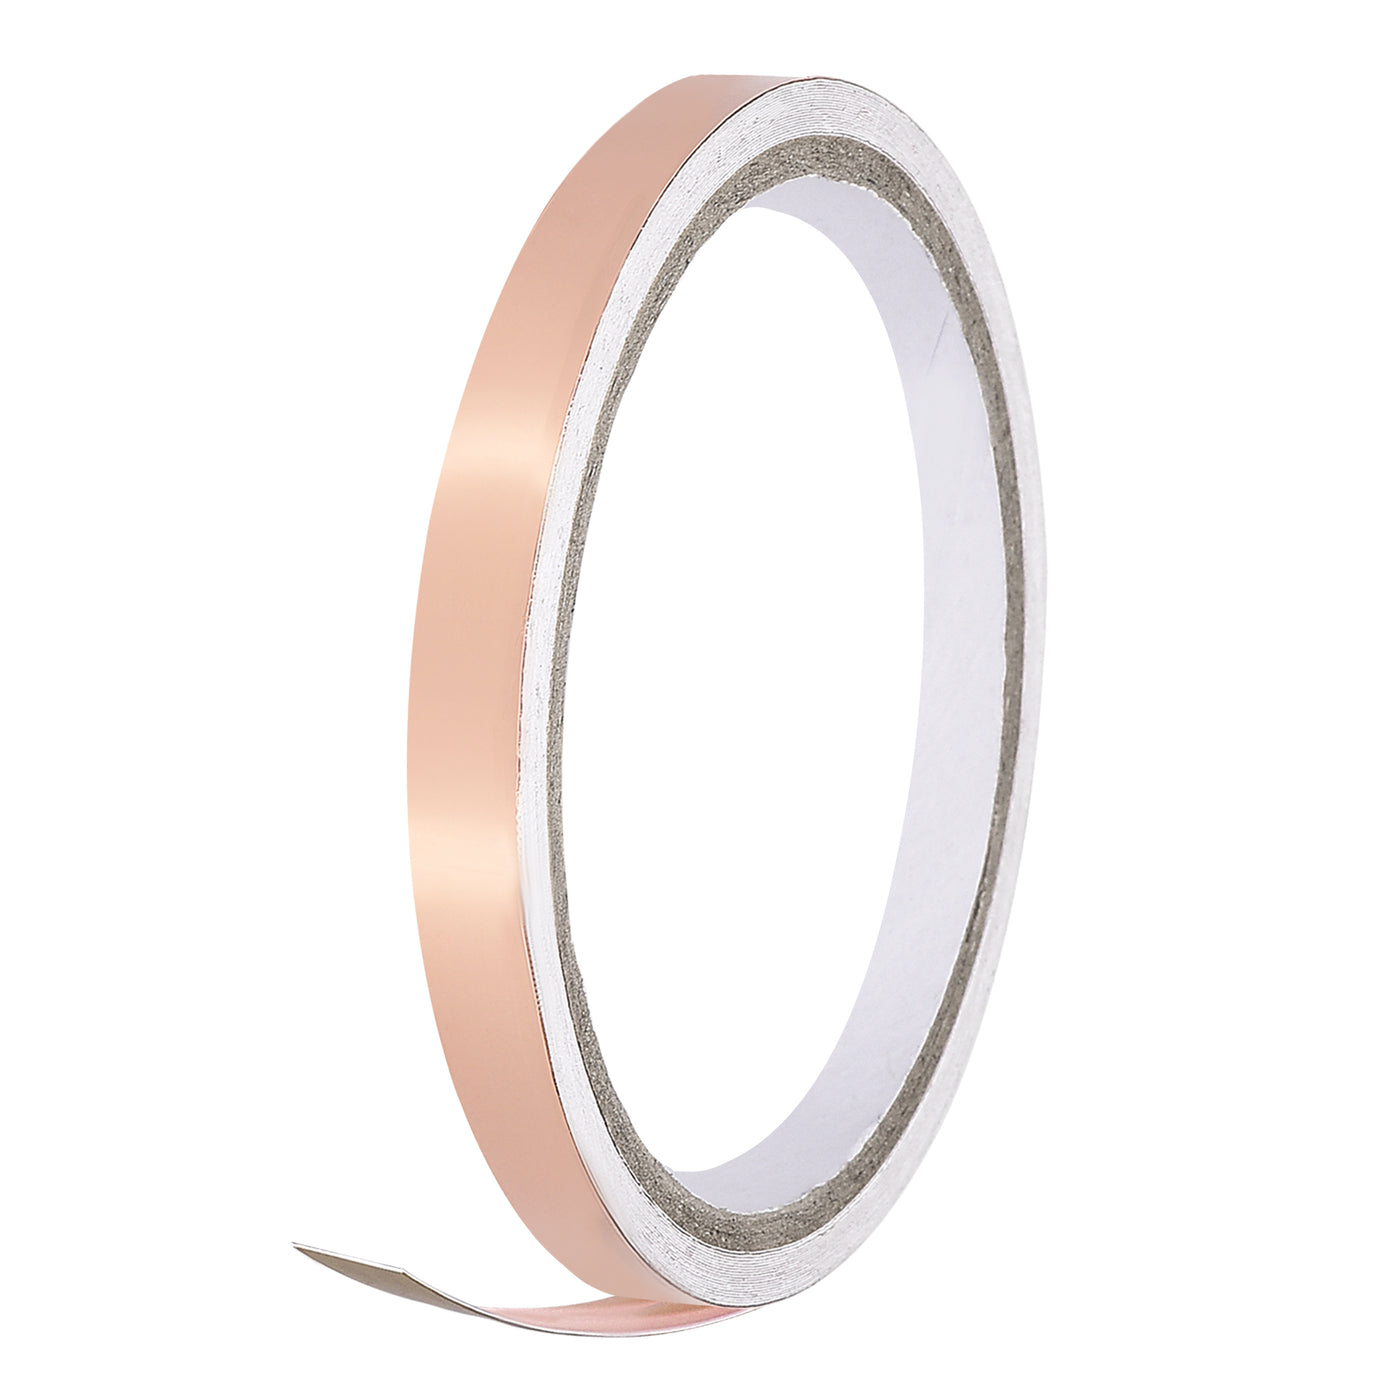 uxcell Uxcell Single-Sided Conductive Tape Copper Foil Tape 12mm x 5m/16.4ft for EMI Shielding 2pcs